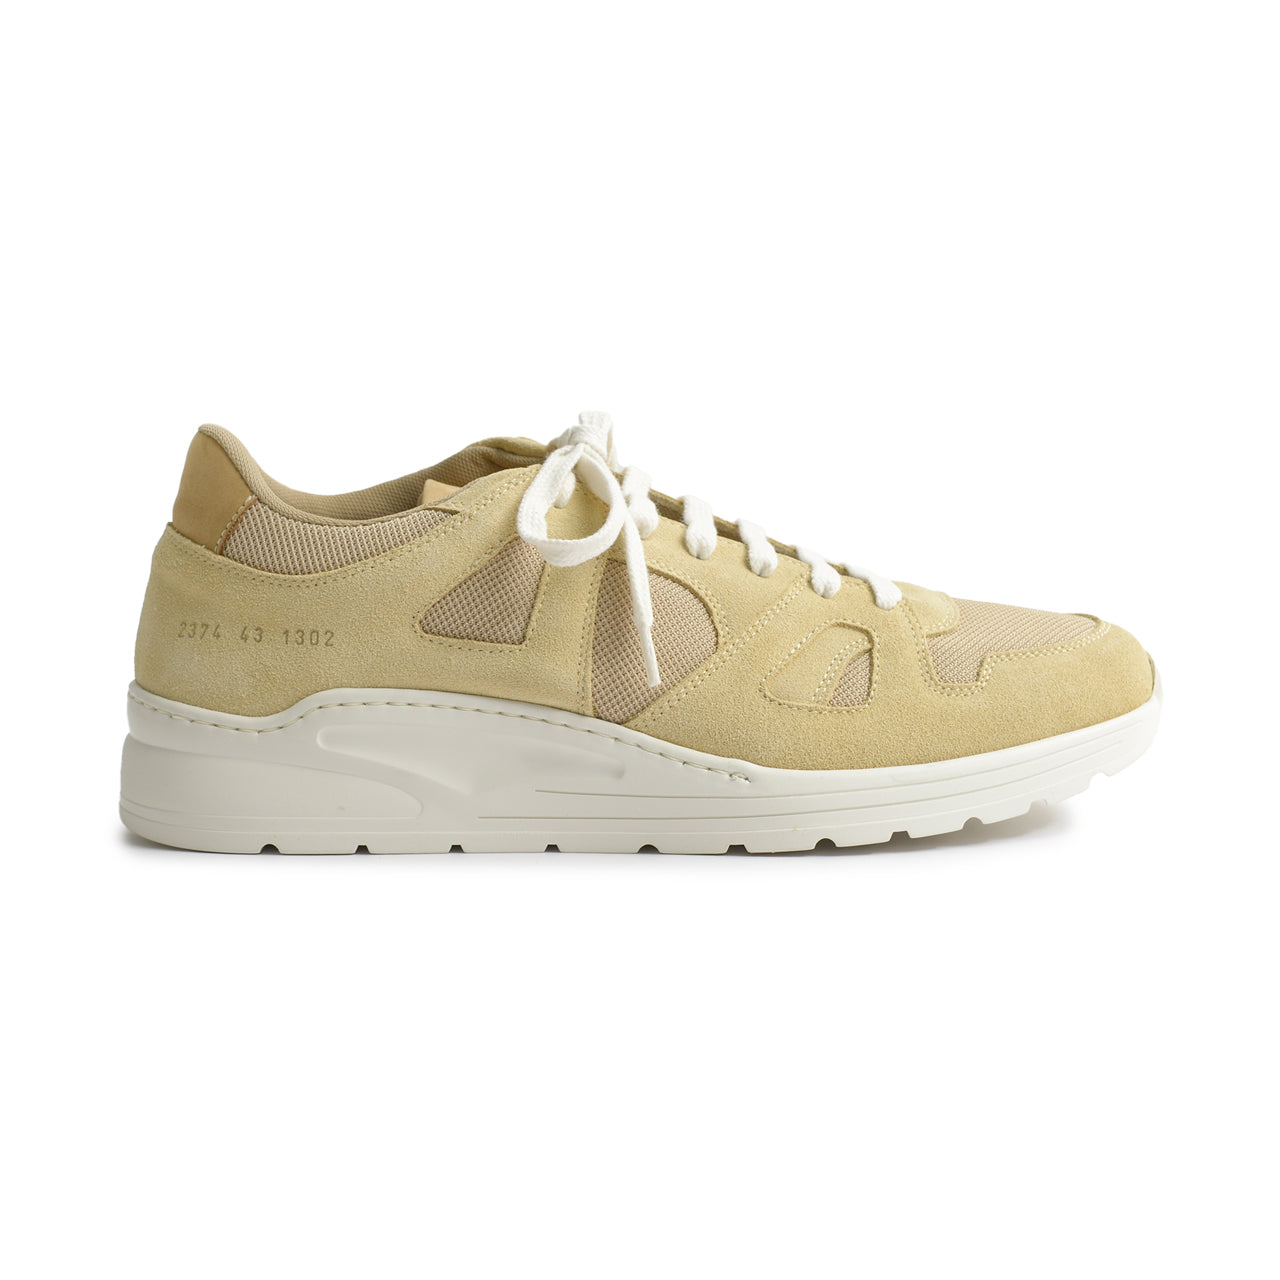 Common Projects Tan Suede Cross Trainer